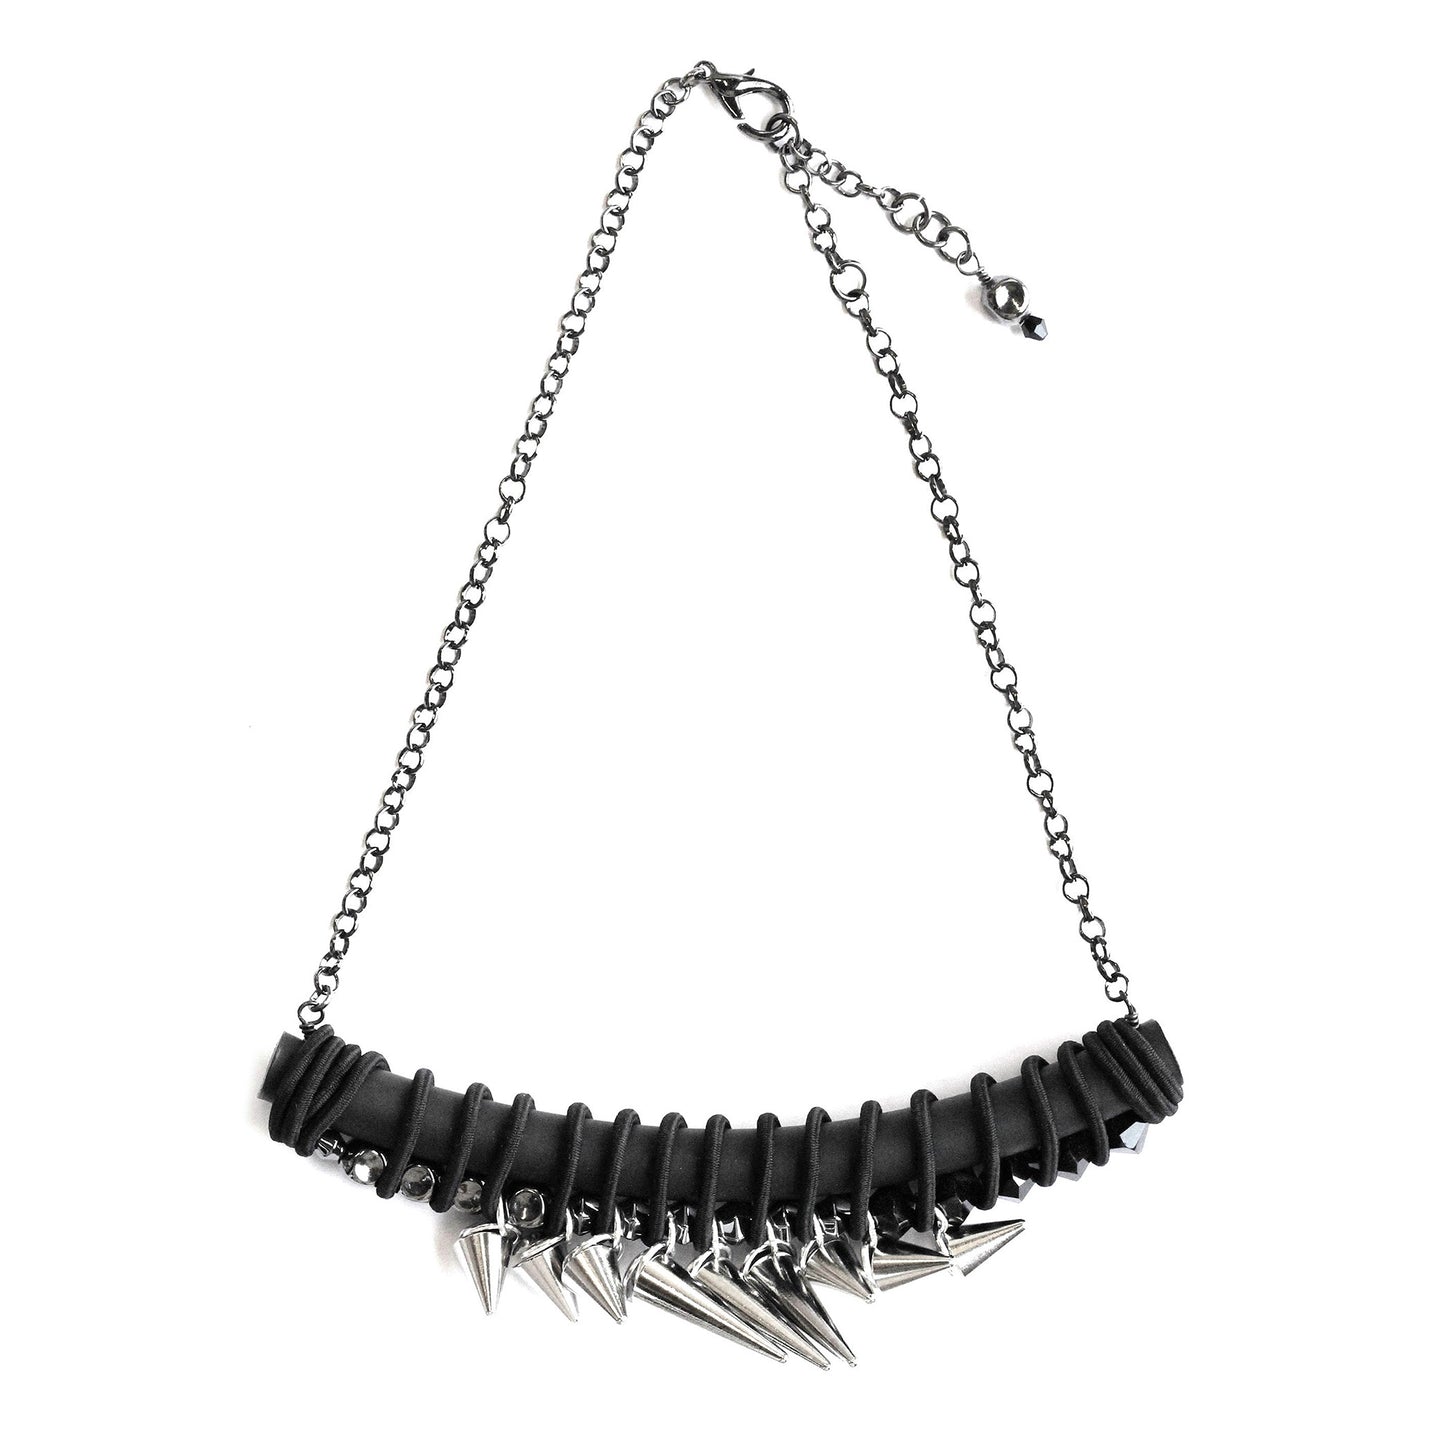 BLACK SHOCK TWIST necklace with stainless steel studs